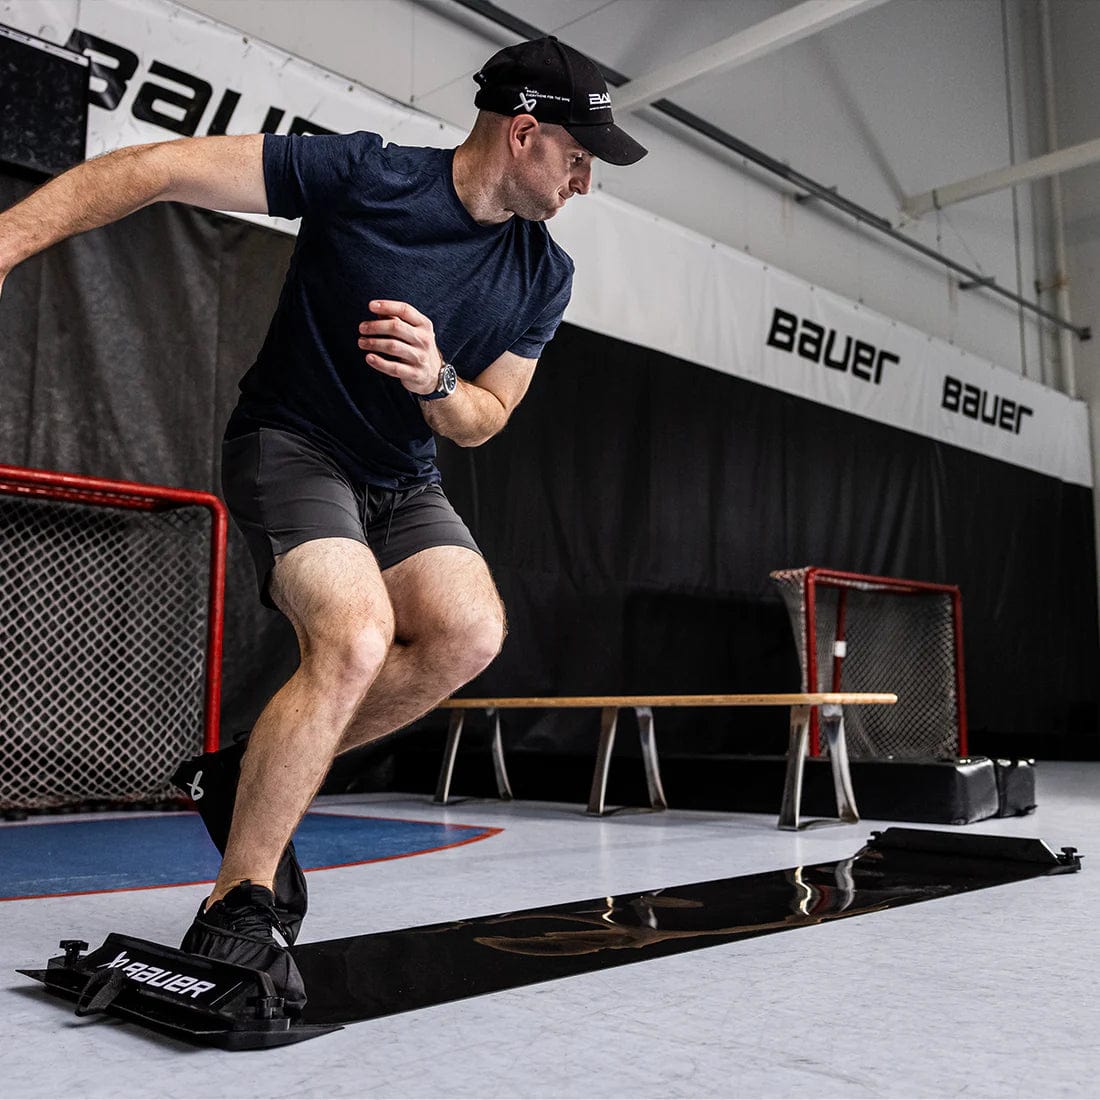 Bauer Reactor Skating Slide Board - The Hockey Shop Source For Sports